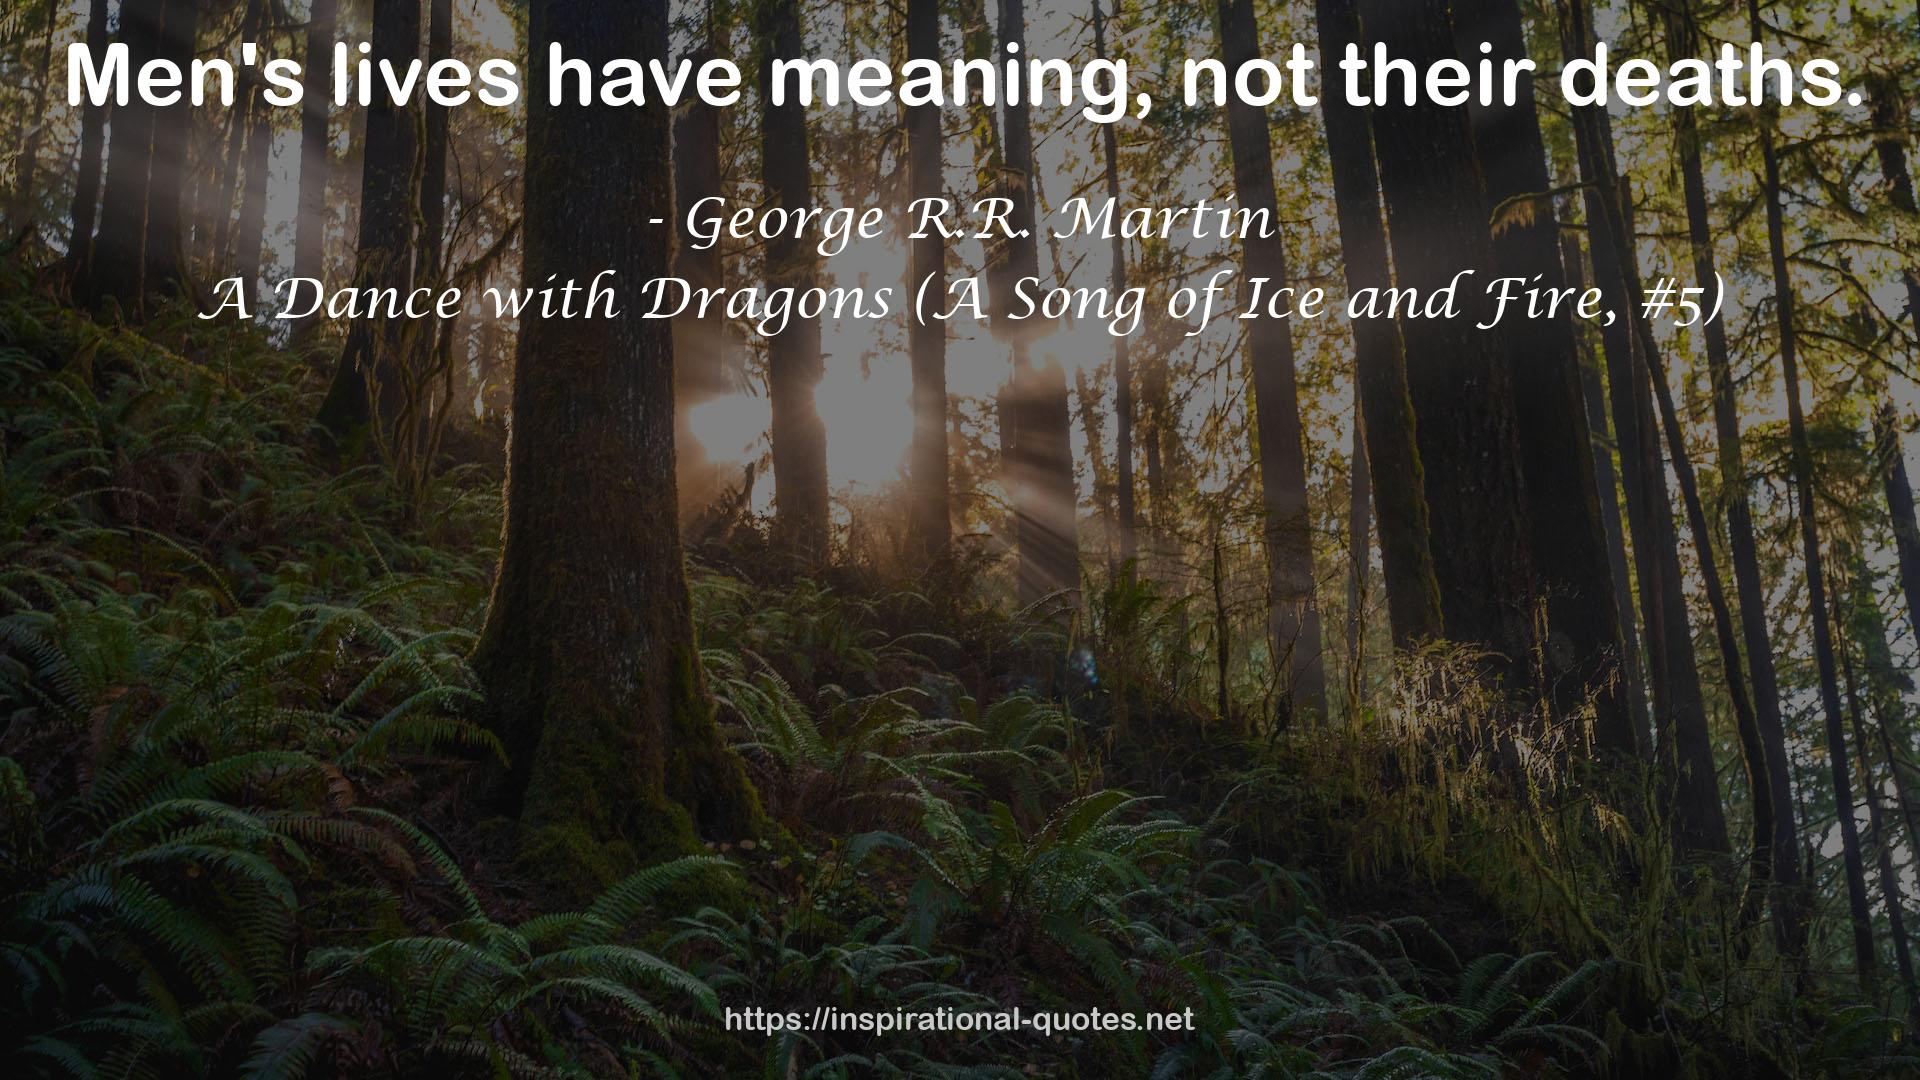 A Dance with Dragons (A Song of Ice and Fire, #5) QUOTES